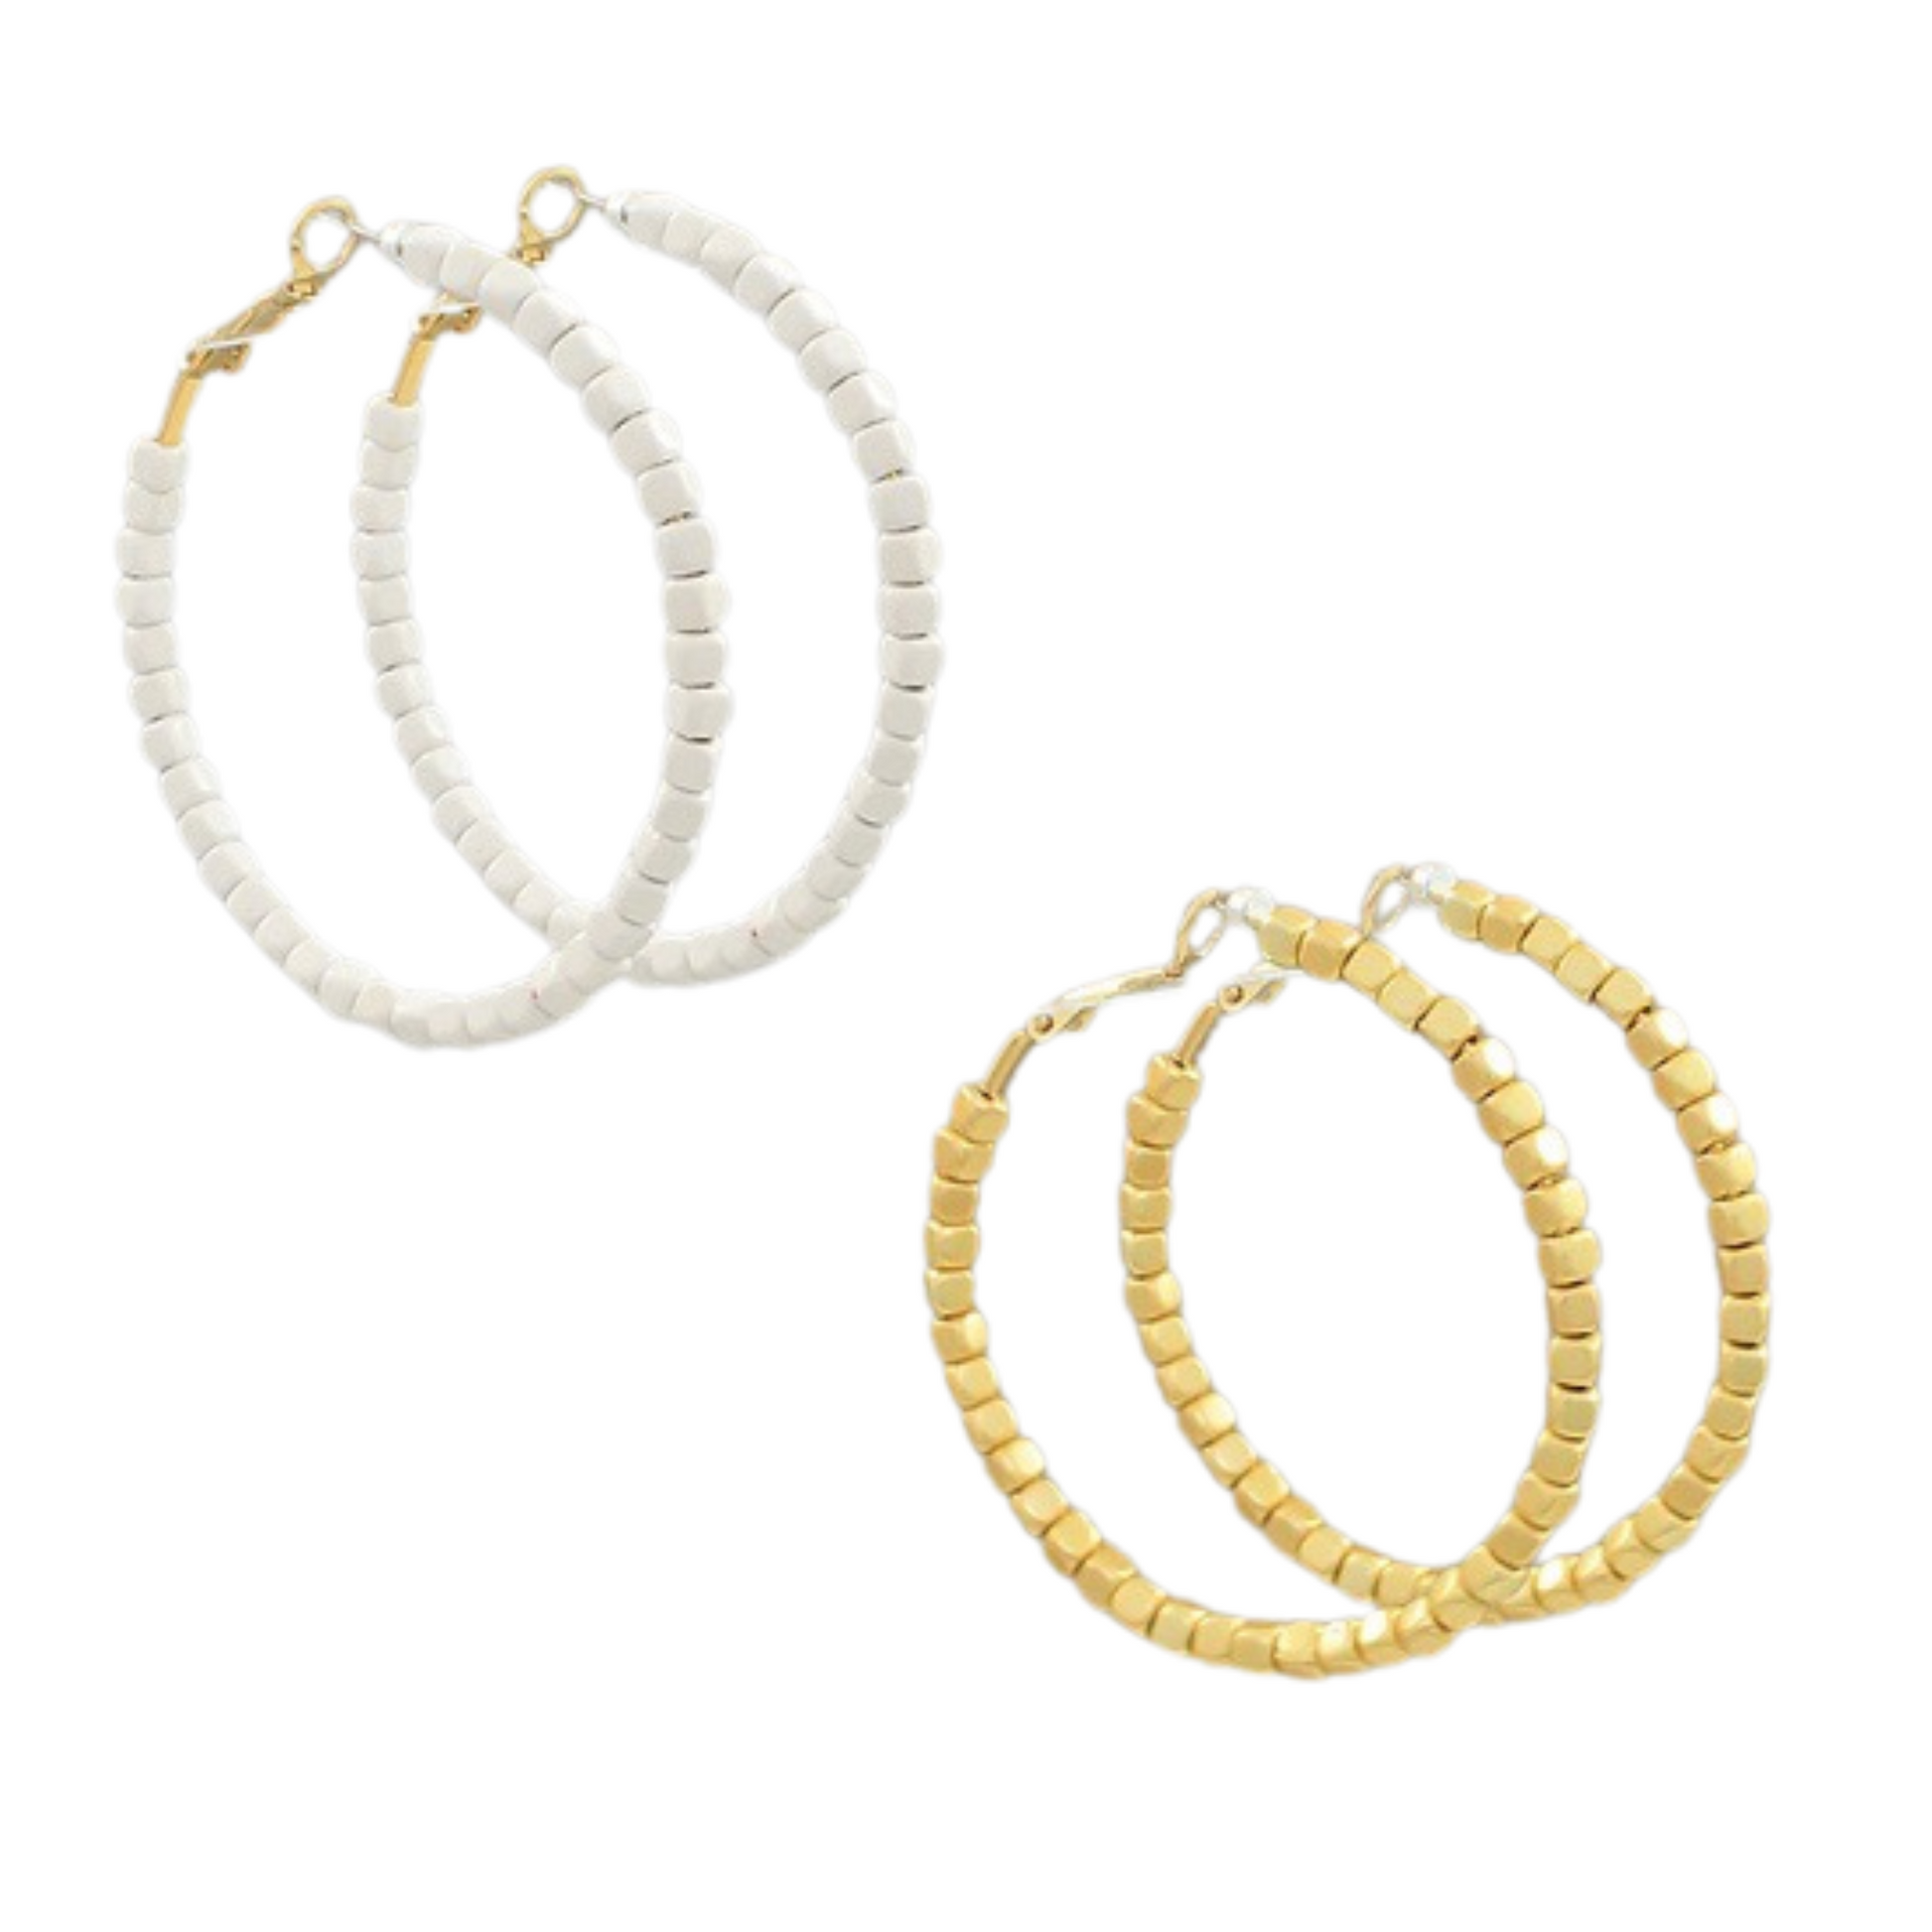 Enhance your style with our Beaded Hoops, expertly crafted with colored beads to add a pop of color to your look. Available in white or gold, these hoops are a versatile addition to any wardrobe. Elevate your outfit with these statement earrings.